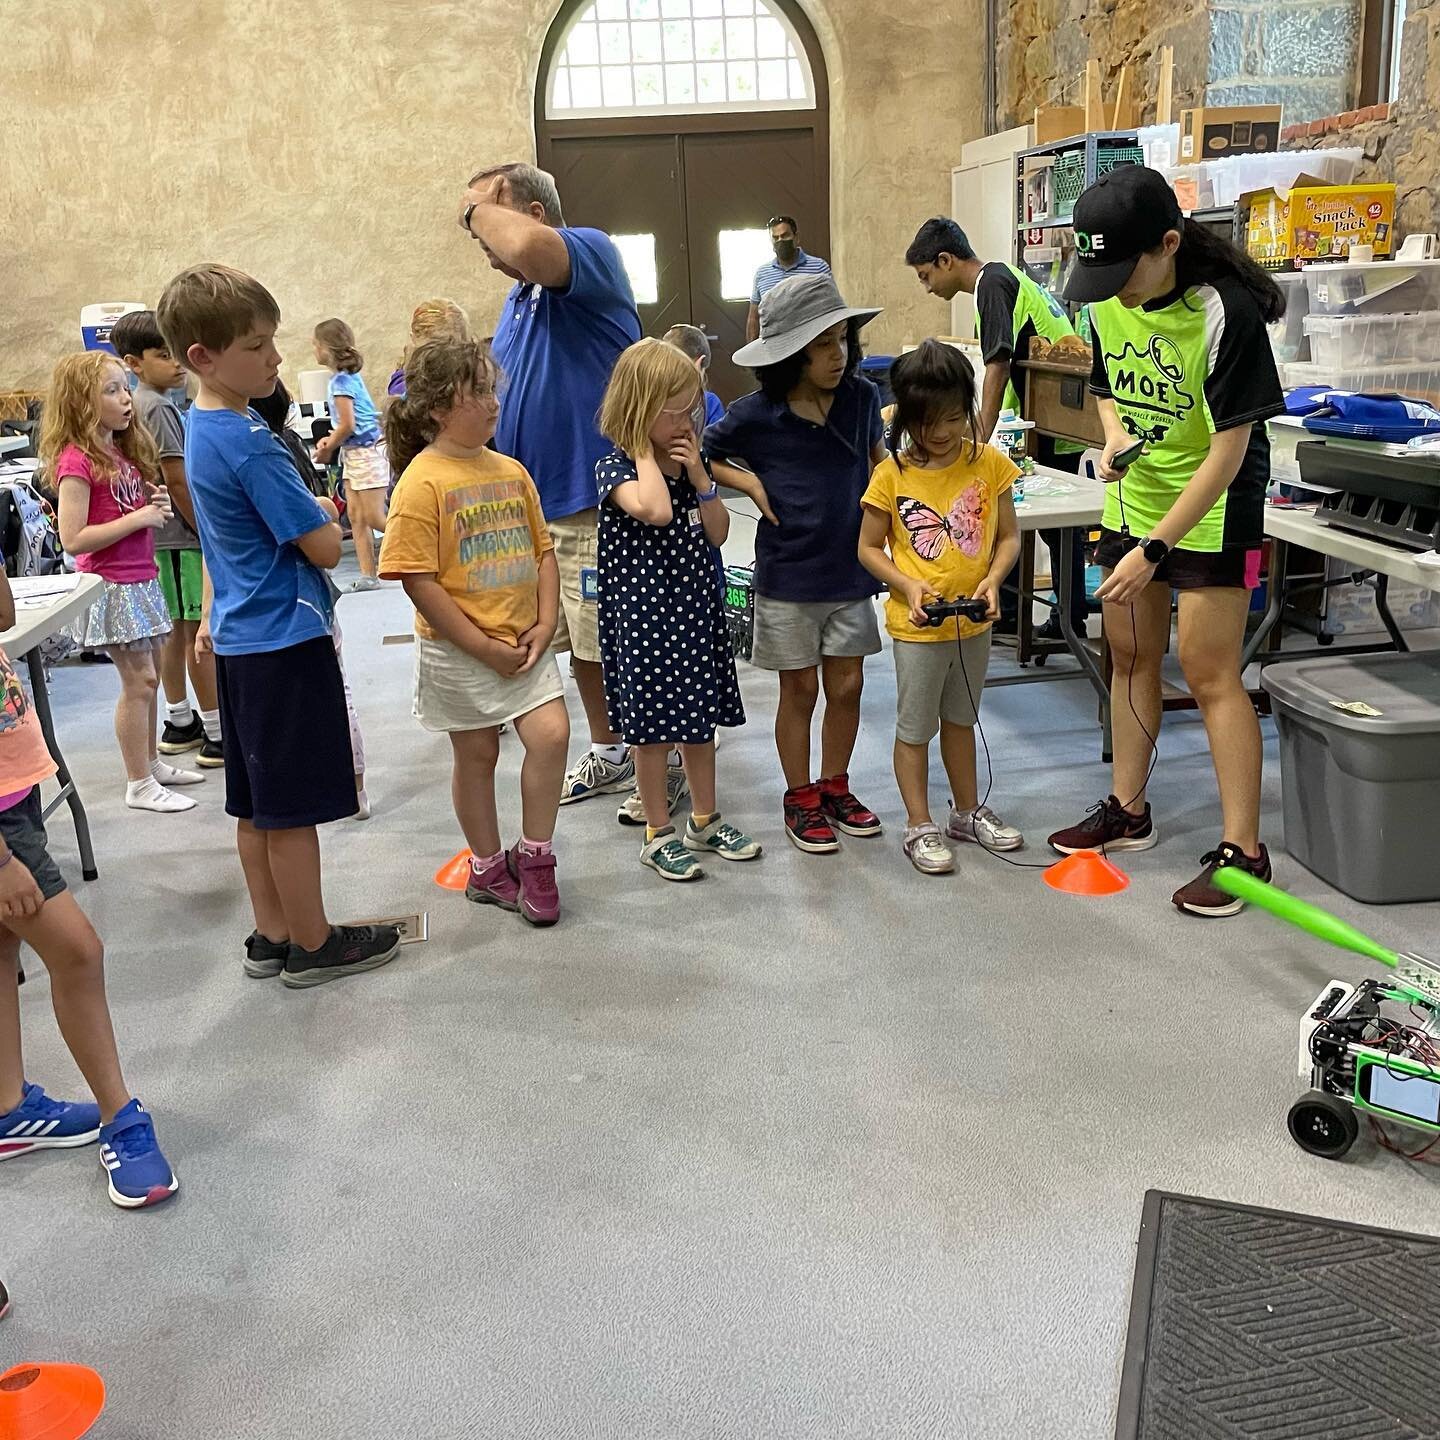 On Thursday, our team visited Hagley Musem to present to the kids attending STEM camp about robots. We brought along our Freight Frenzy robot and batter-bot for the kids to drive around smal courses. They had lots of fun and we hope to visit again ne